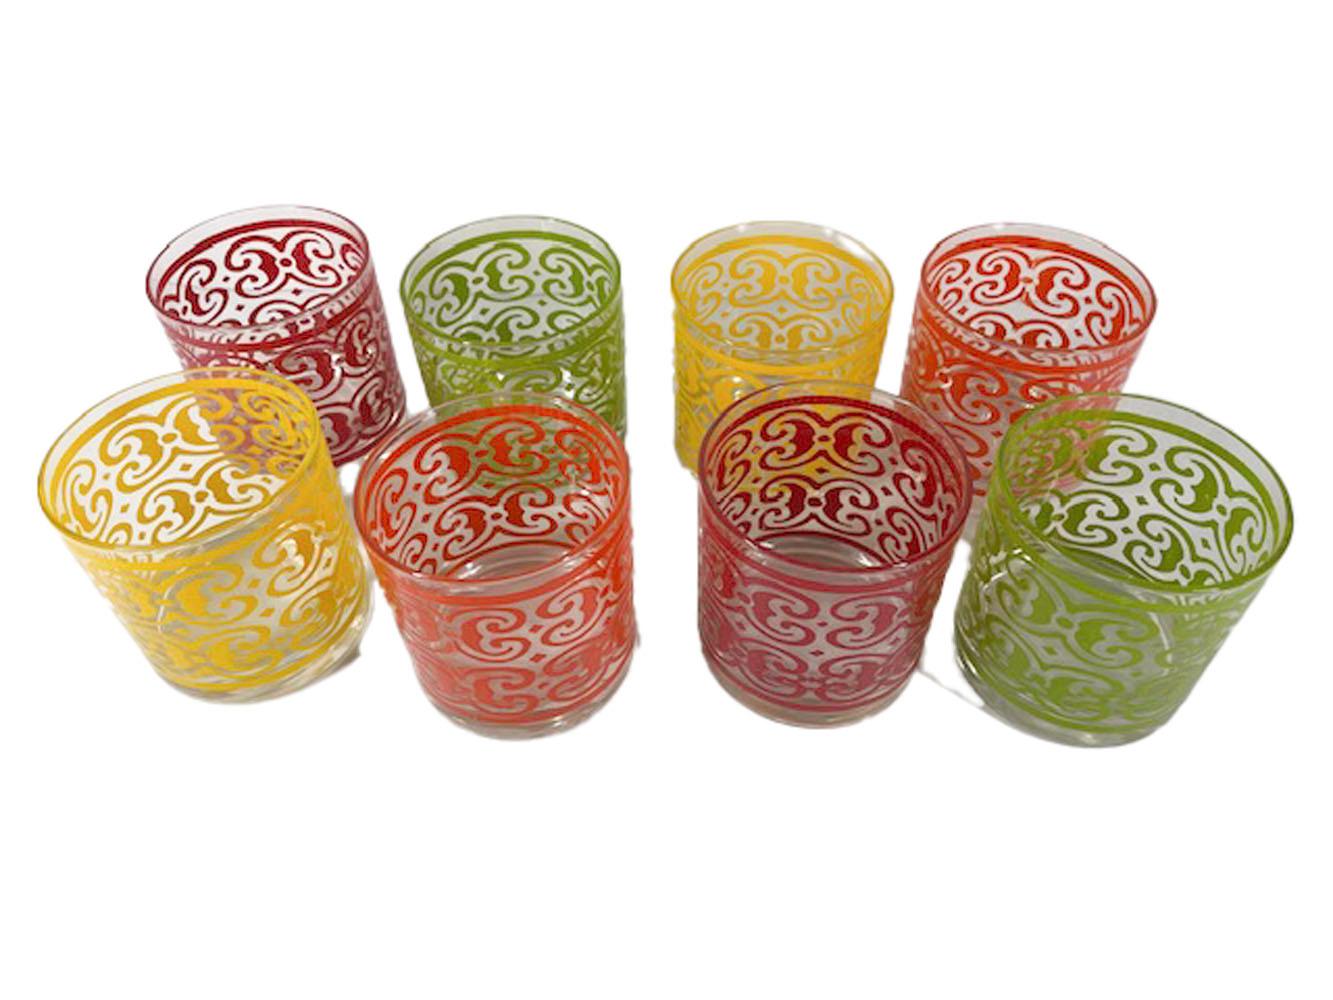 Mid-century set of 8 rocks glasses by West Virginia Glass Company in the Castile pattern. Raised textured enamel scrolls in two each of four colors Yellow, red, green and orange complete the set.